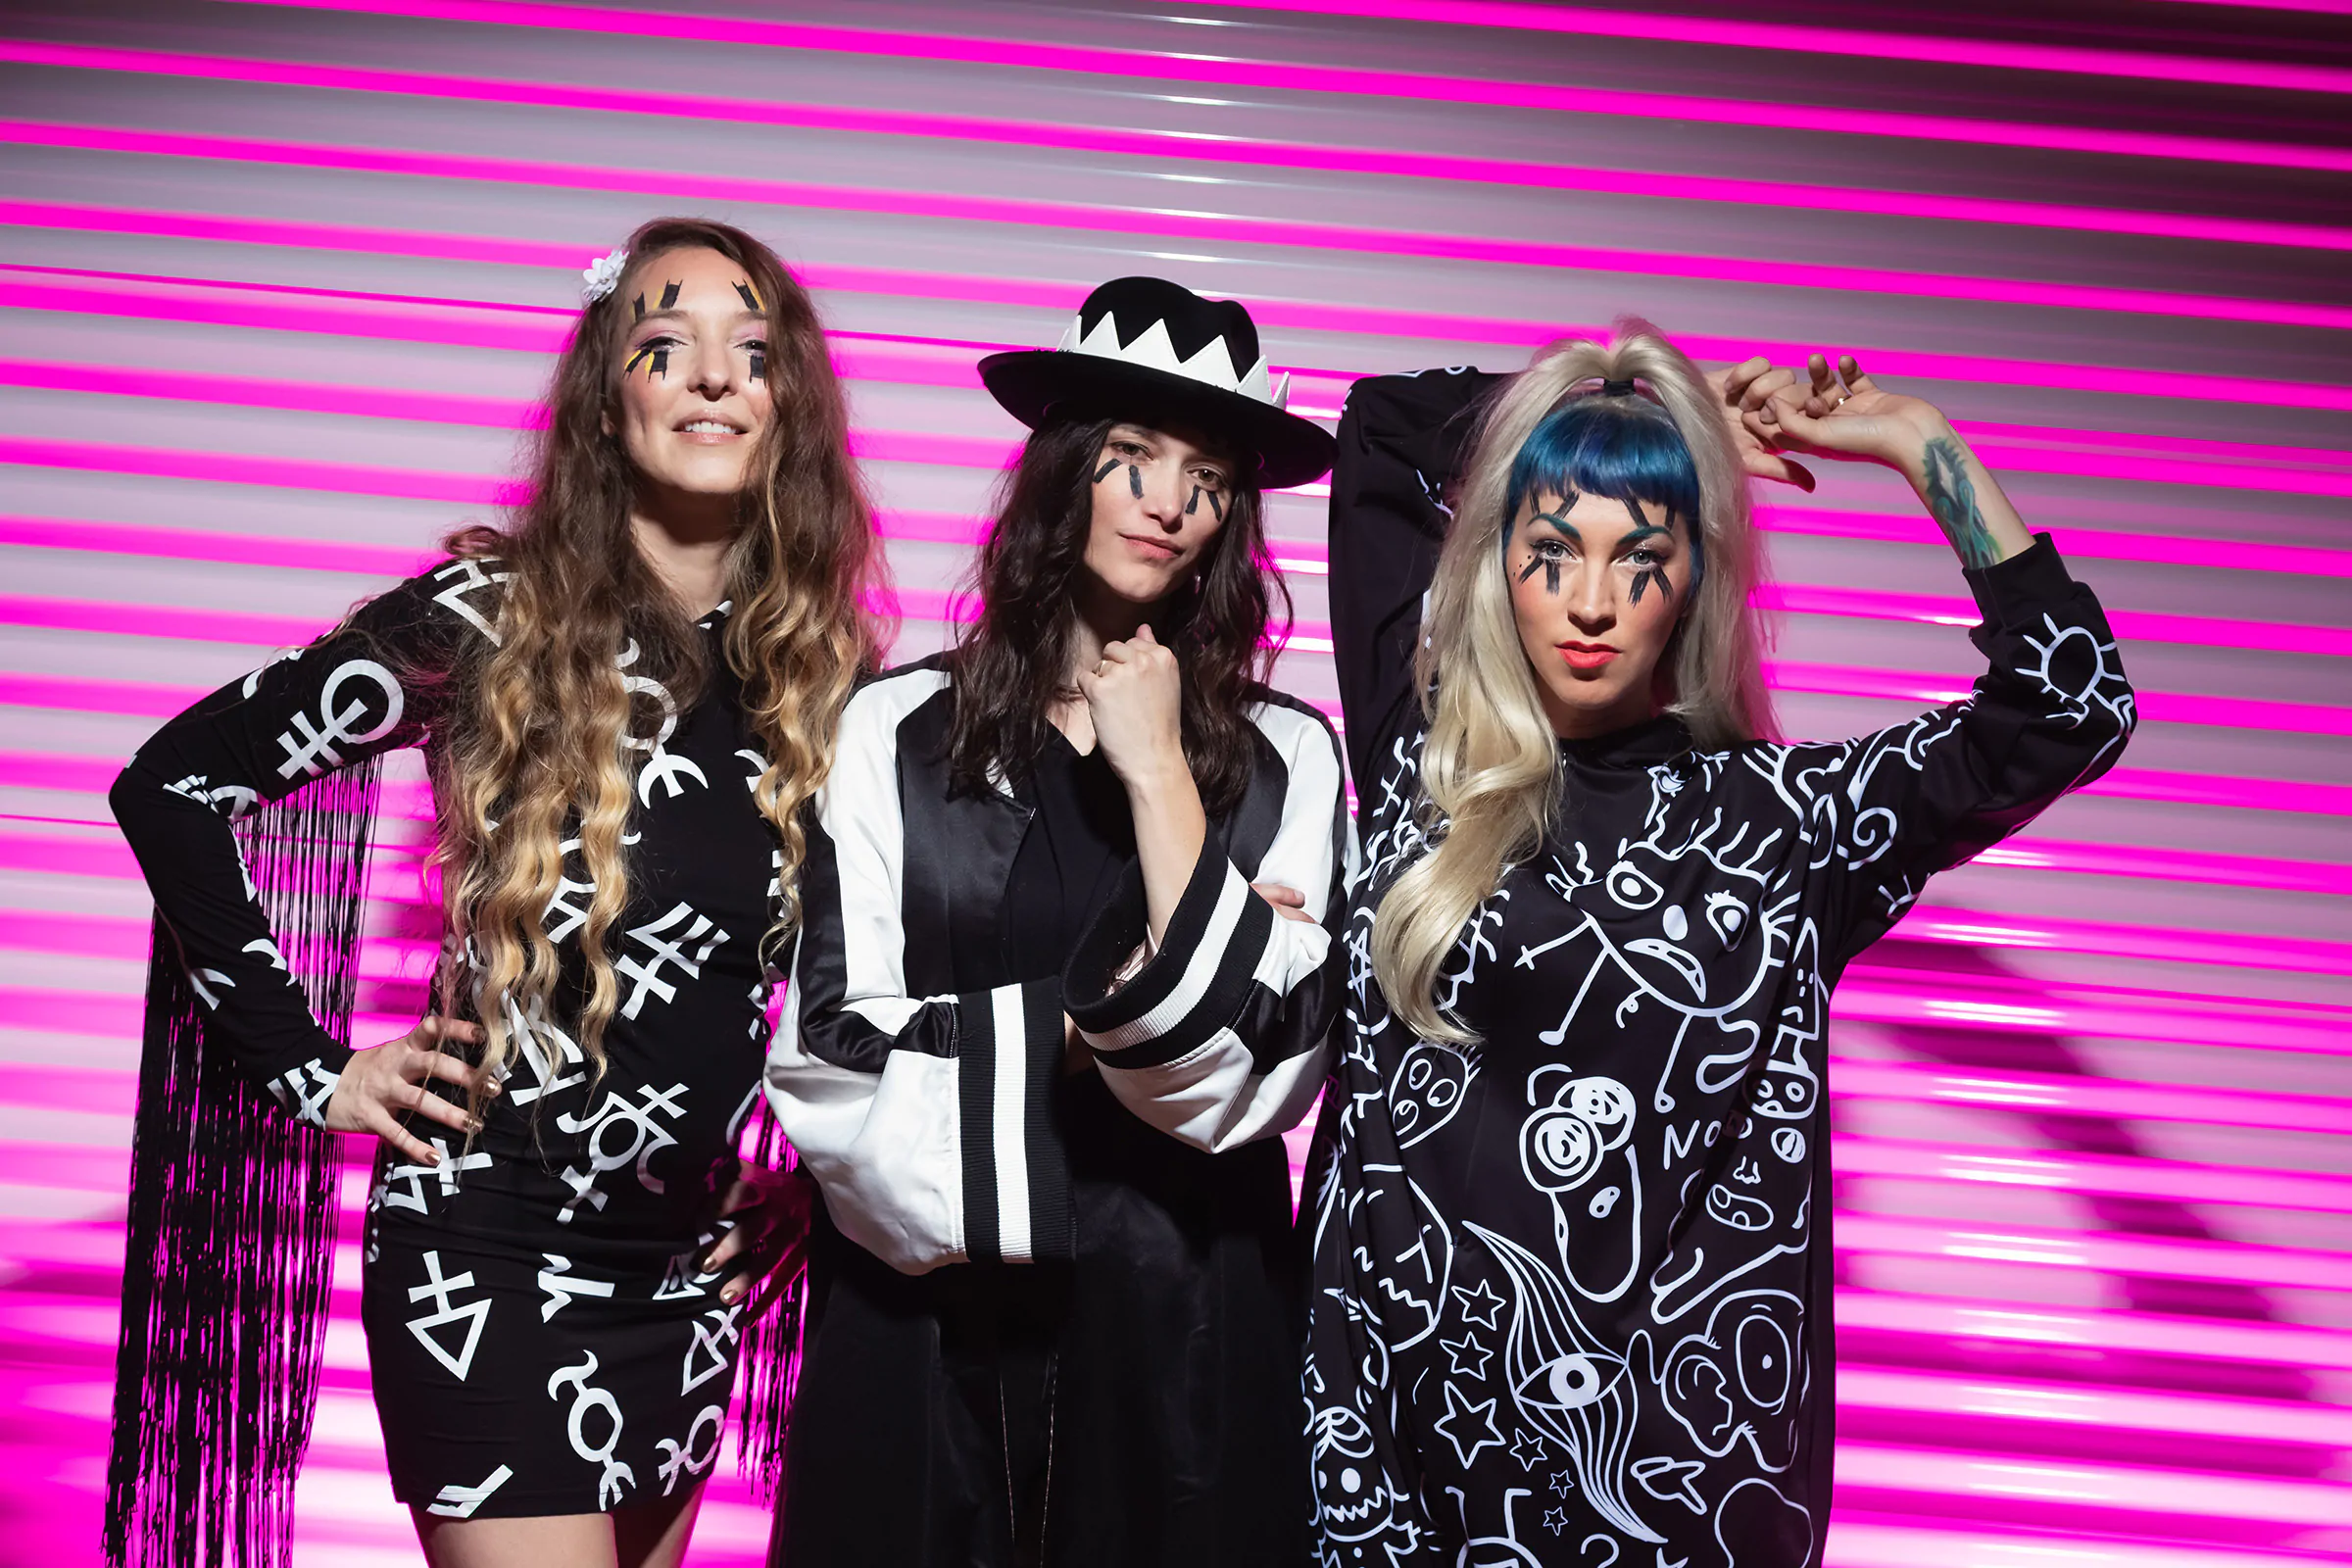 THE DEAD DEADS release video for “Deal With Me” on International Women’s Day